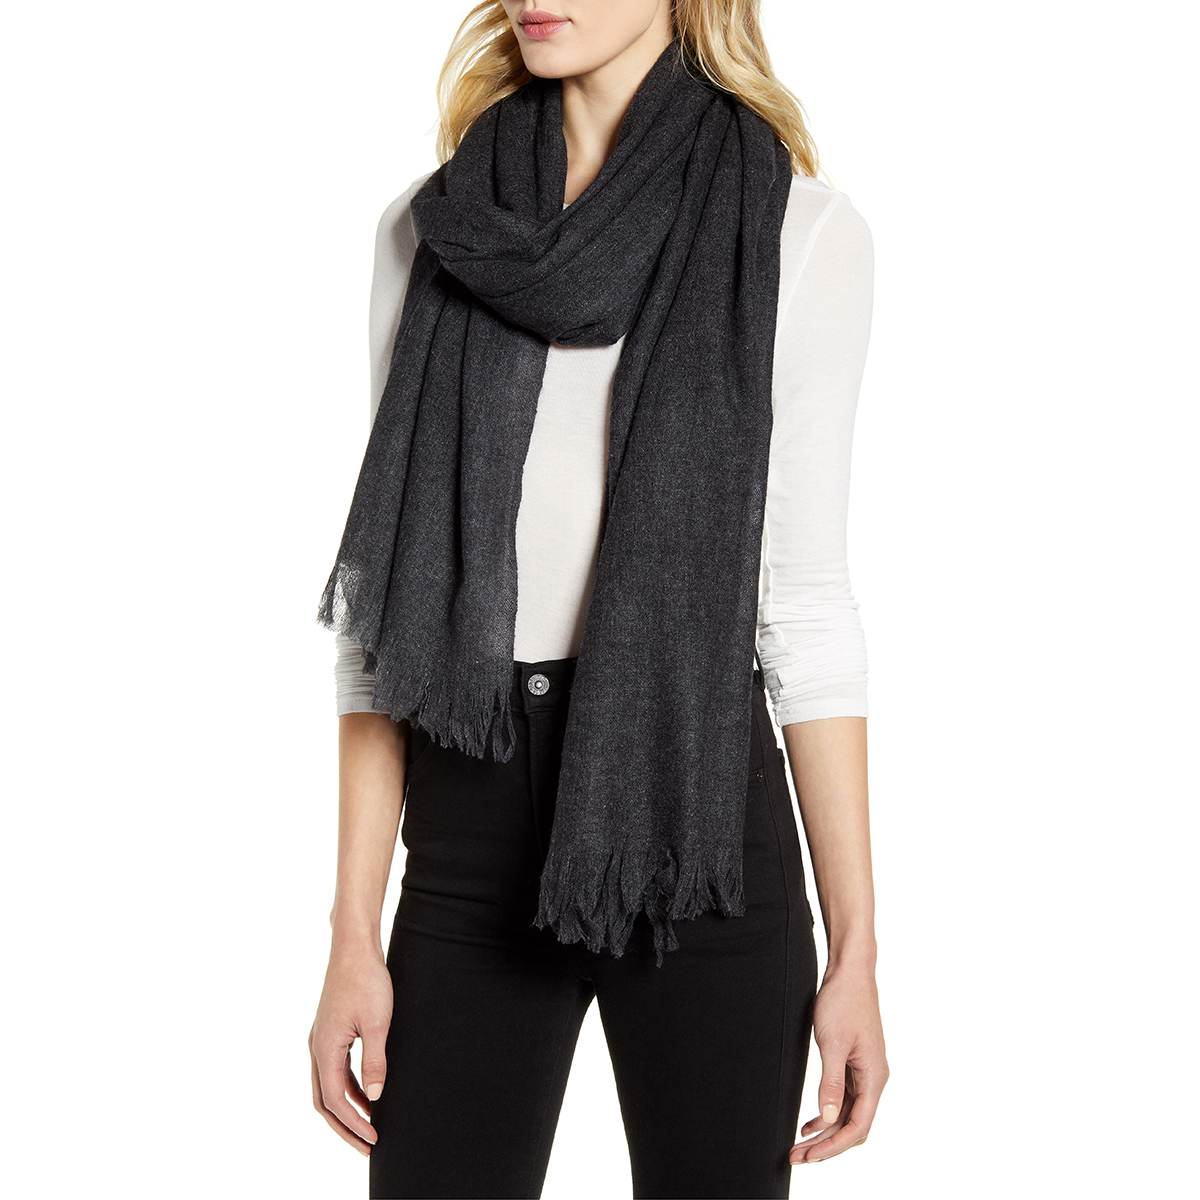 This Scarf Is 100% Cashmere — And 40% Off in the Nordstrom Sale!